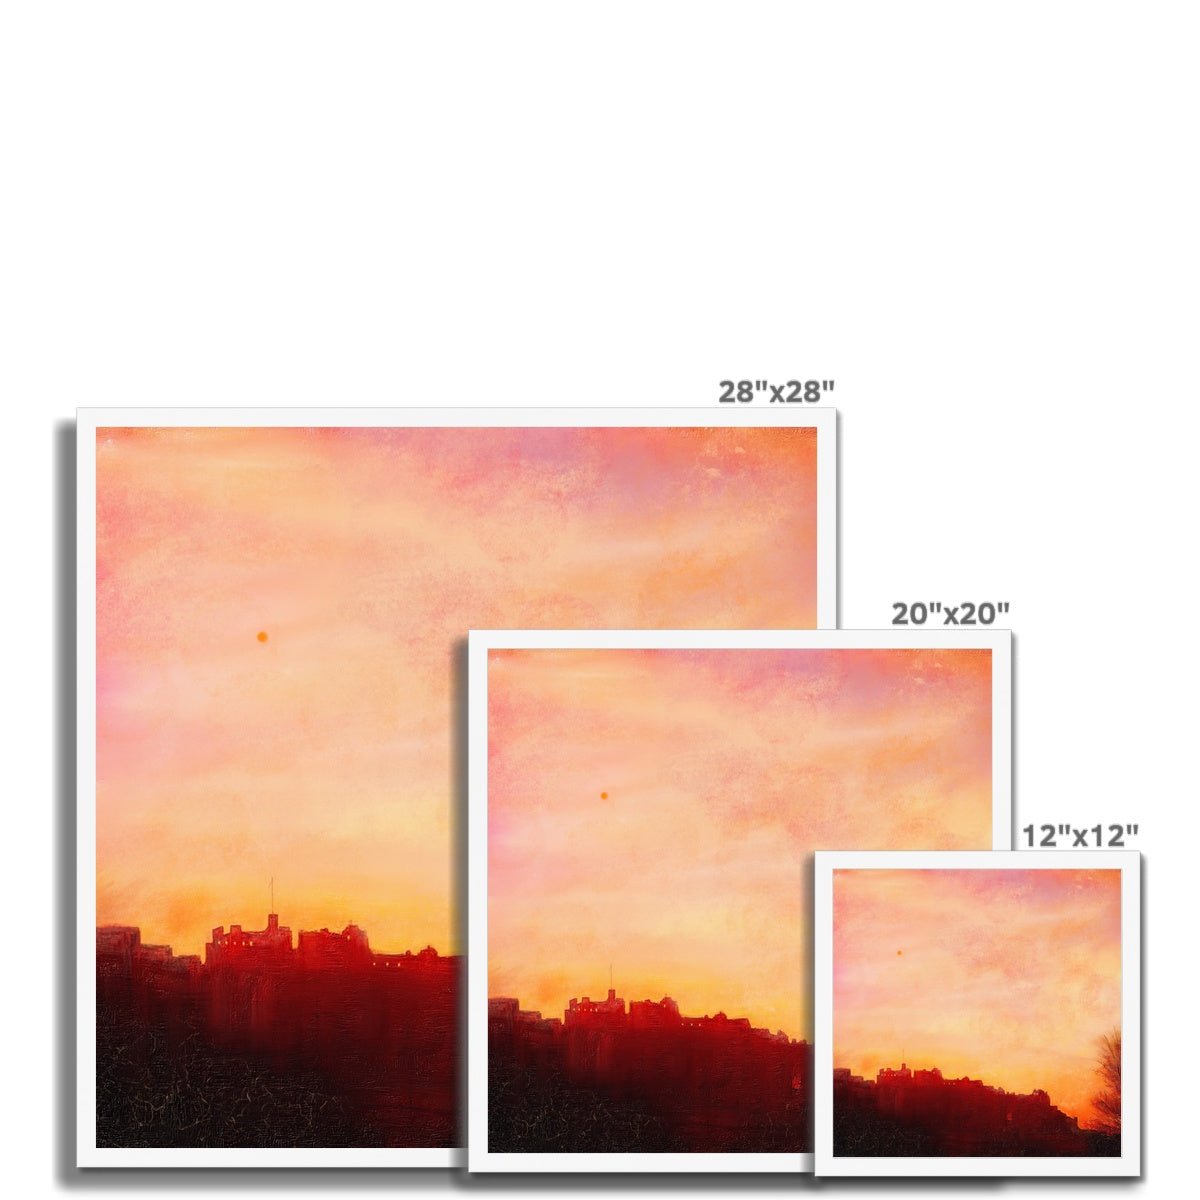 Edinburgh Castle Sunset Painting | Framed Prints From Scotland-Framed Prints-Historic & Iconic Scotland Art Gallery-Paintings, Prints, Homeware, Art Gifts From Scotland By Scottish Artist Kevin Hunter